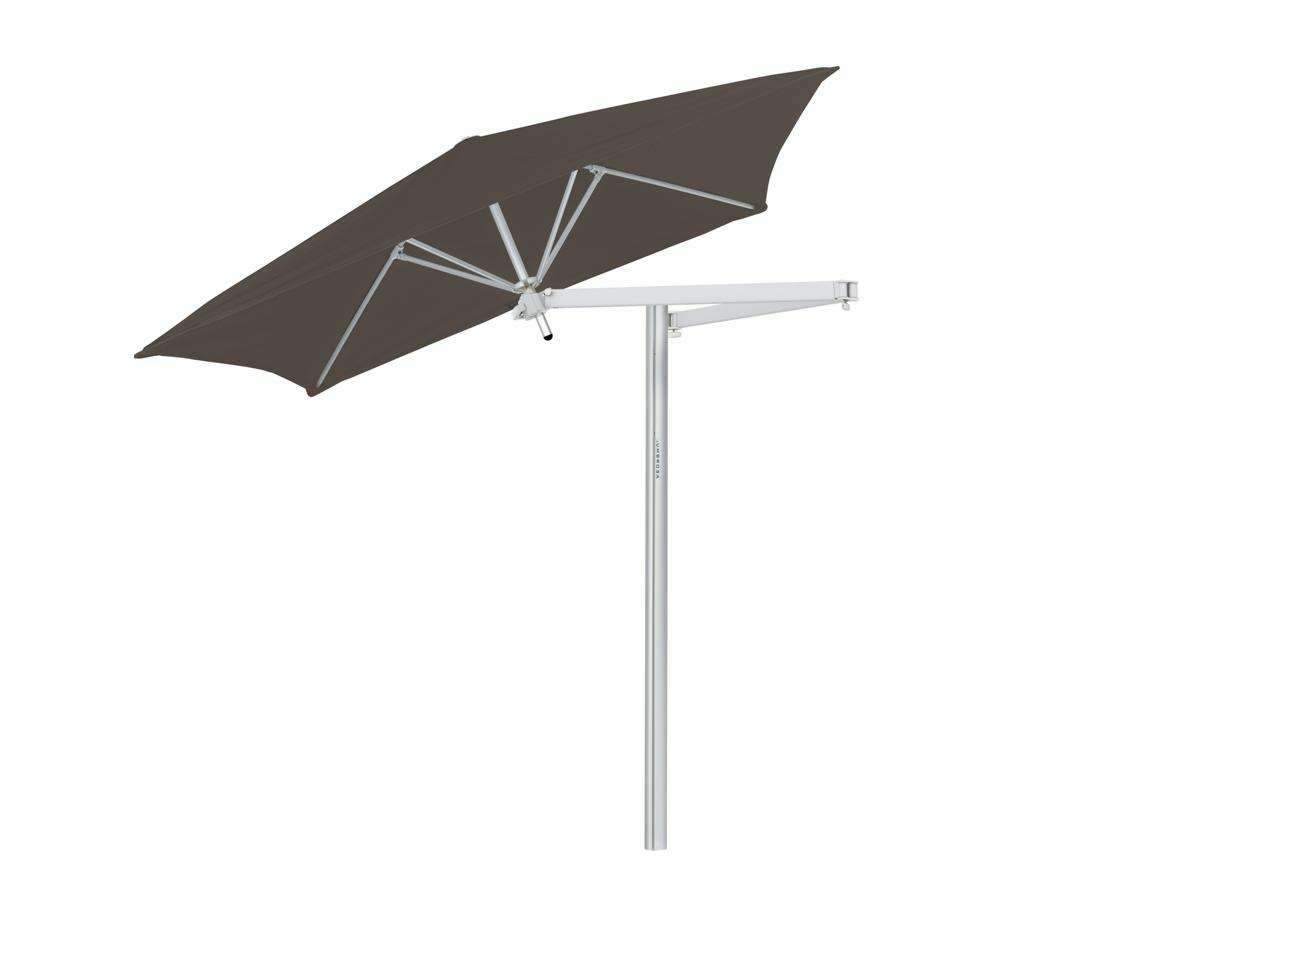 Paraflex cantilever umbrella square 1,9 m with Taupe fabric and a Neo arm